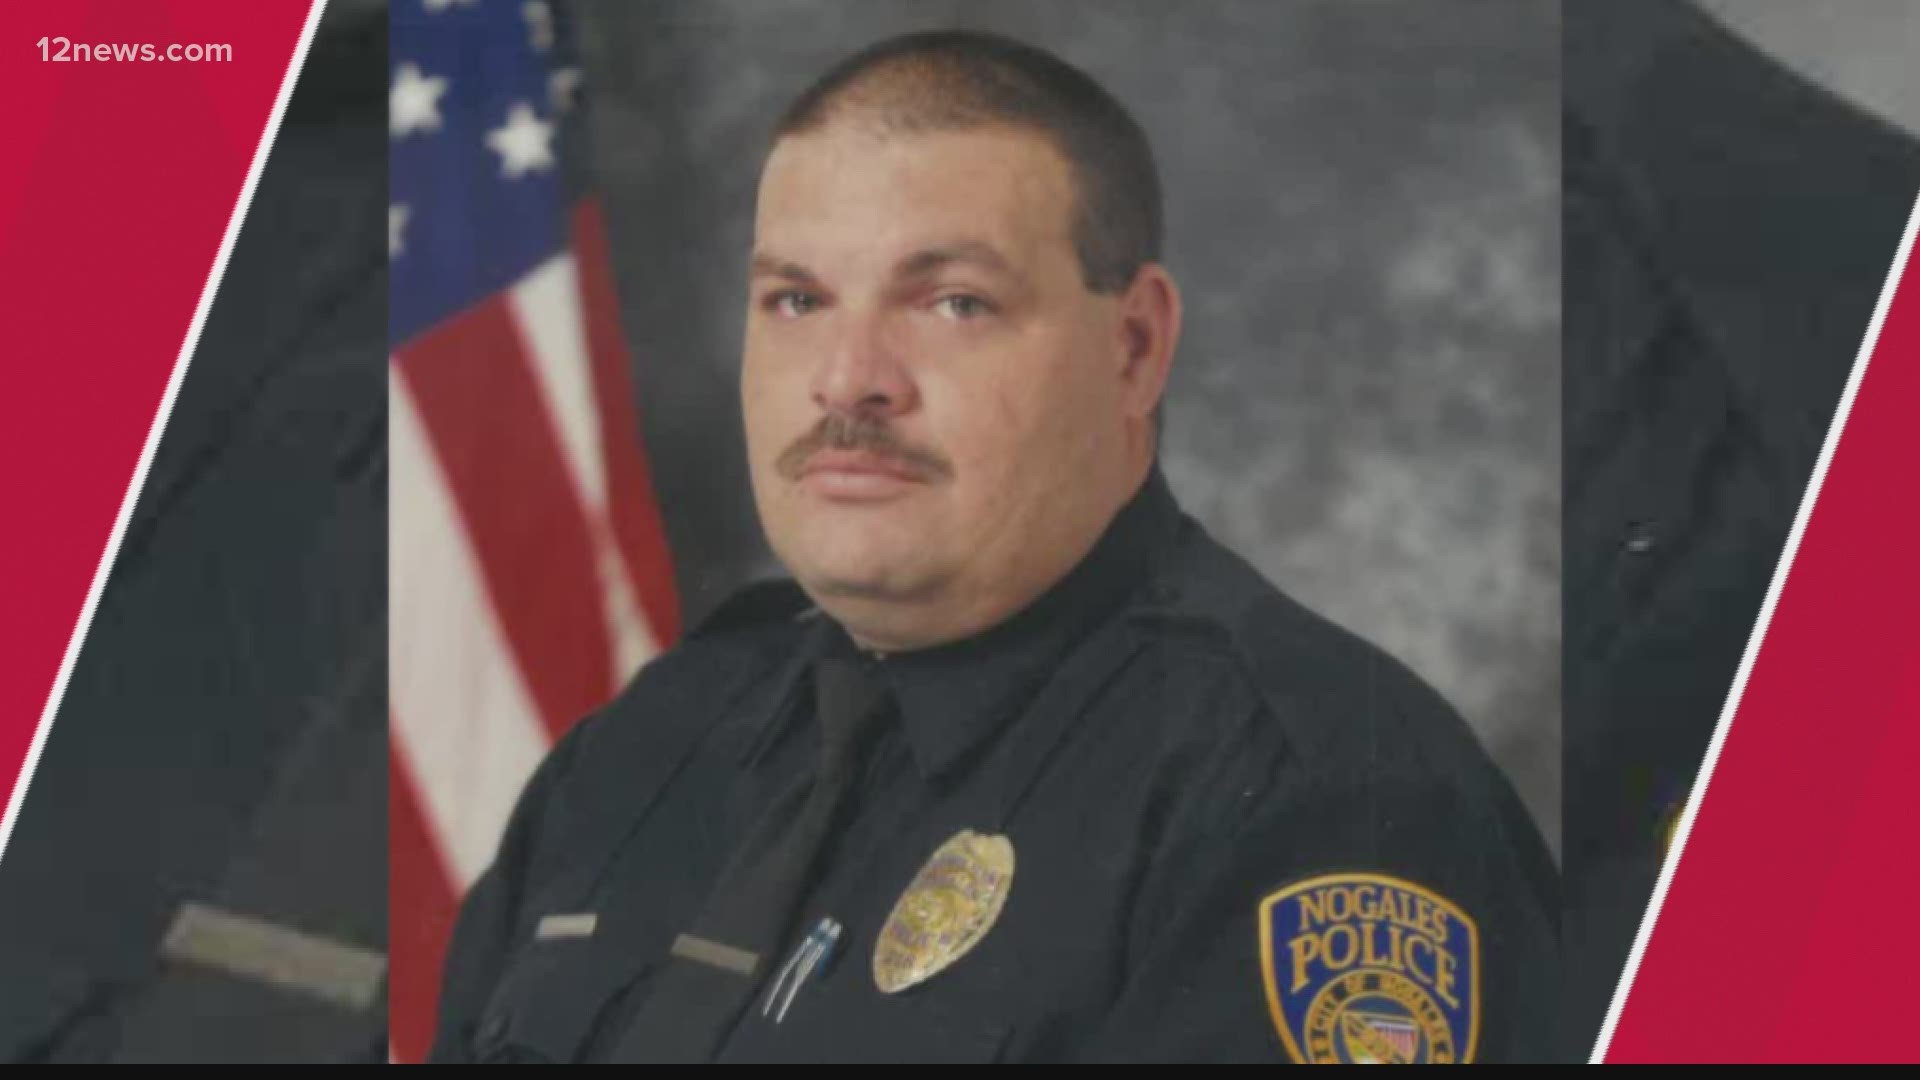 A Nogales Police officer has died after being hit by a car while on an off-duty assignment on Thursday night. Officer Jeremy Brinton was helping with a lane closure.